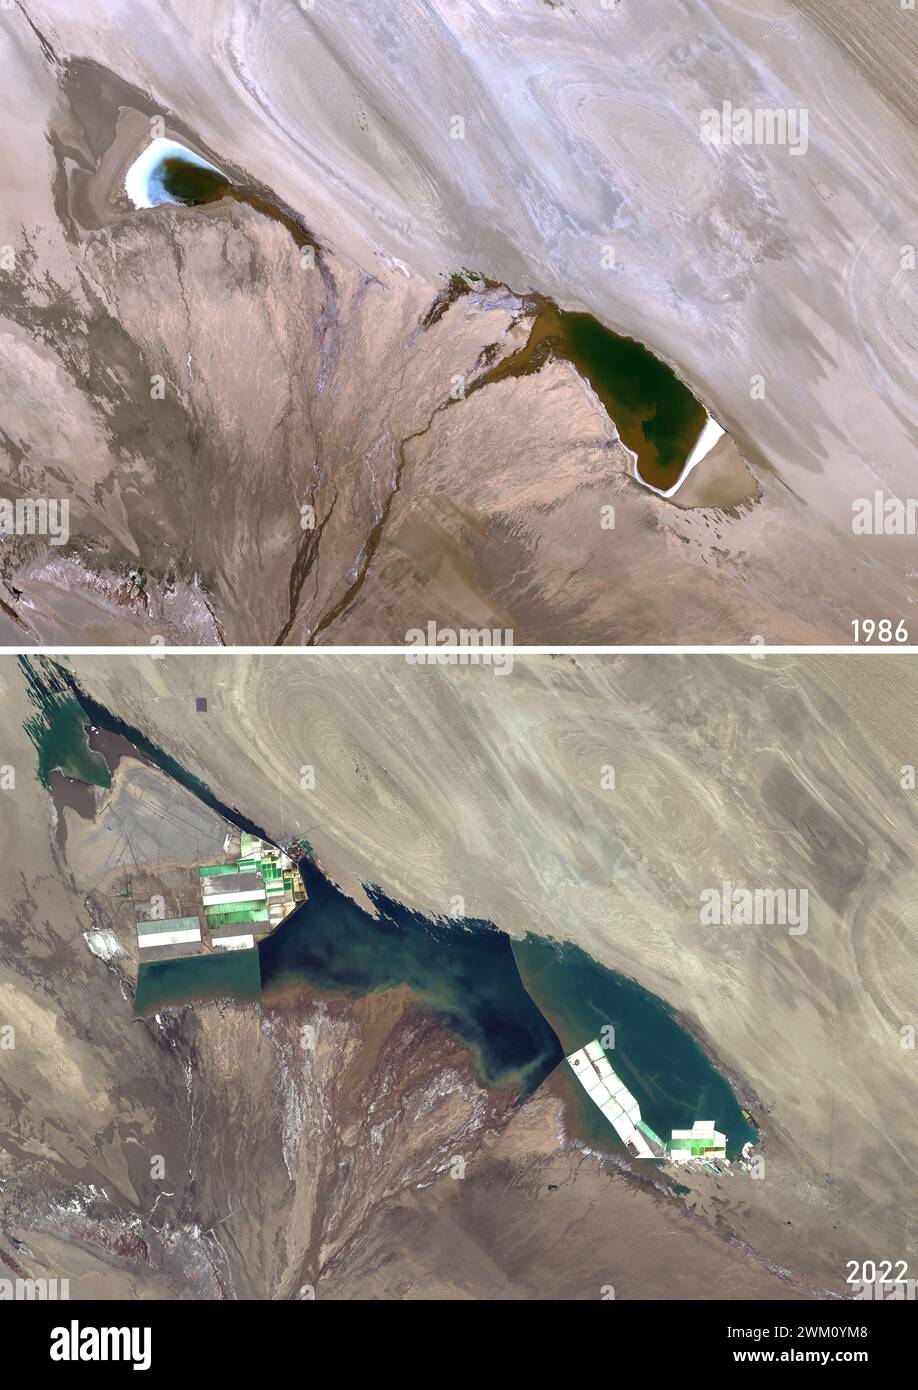 Color satellite image of Dongtai Salt Lakes, Qinghai, China in 1986 and 2022. This before/after image shows how the site has been turned into a lithium brine extraction site with evaporation ponds. Stock Photo